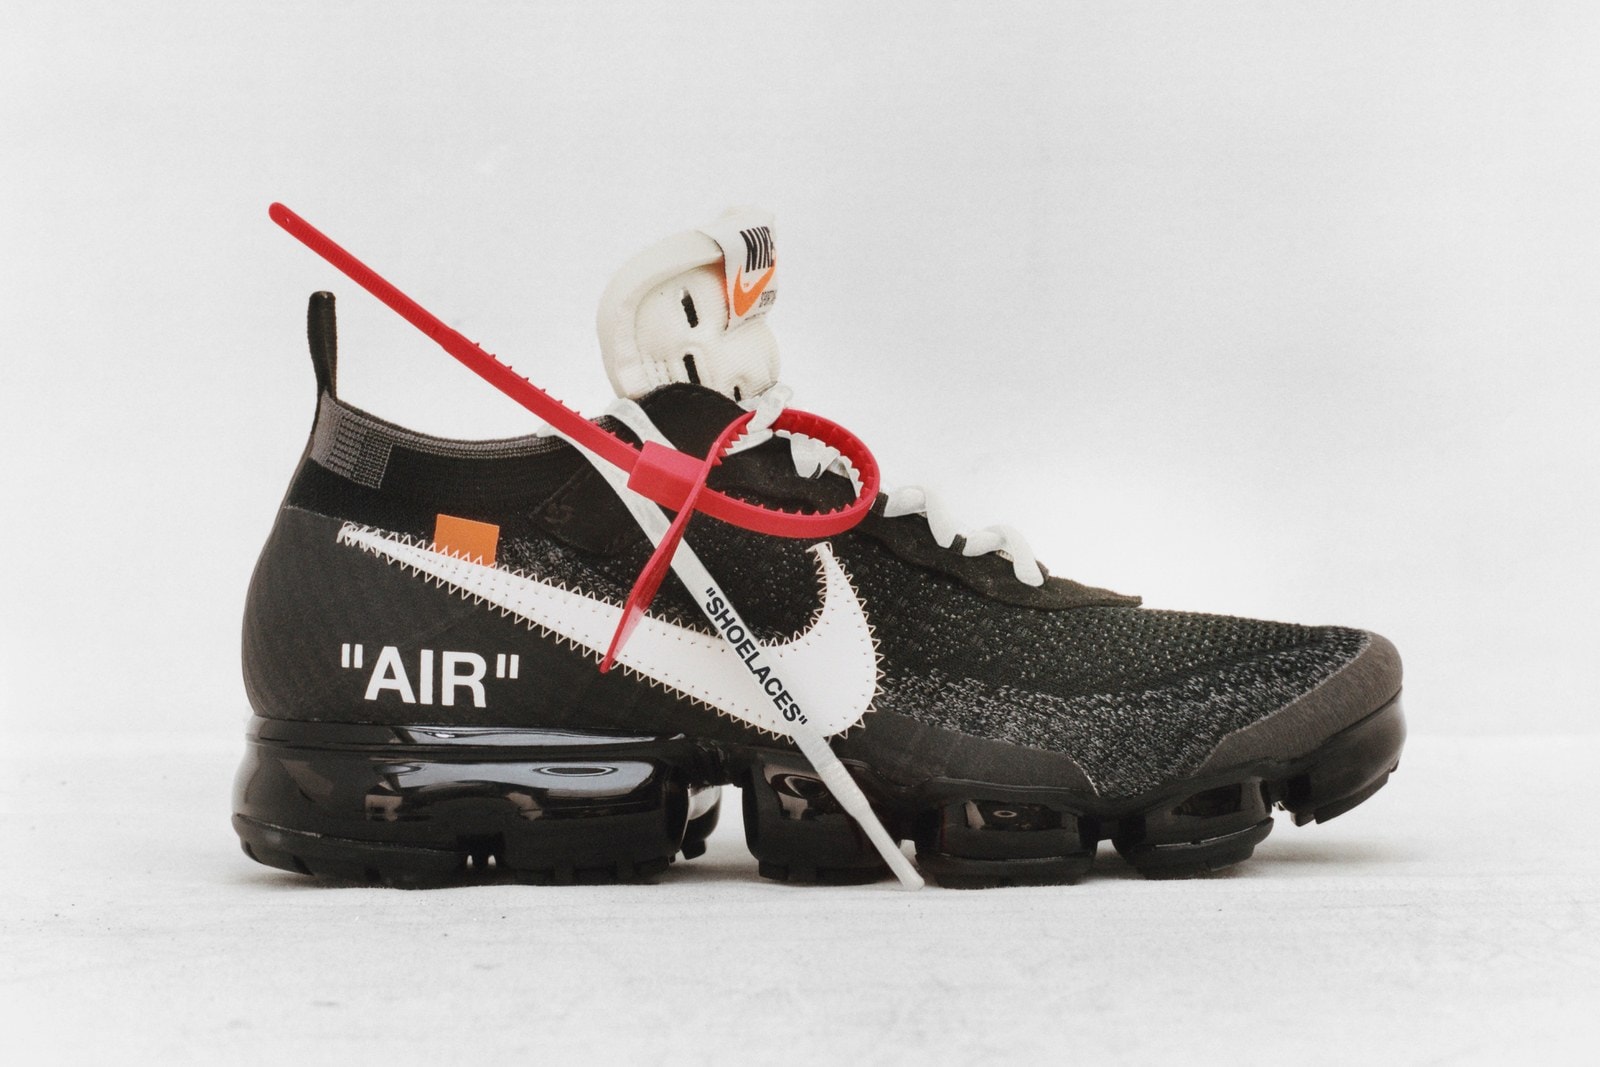 Nike x Off-White The Ten: The Iconic Sneaker Collaboration Explained, Sneakers, Sports Memorabilia & Modern Collectibles